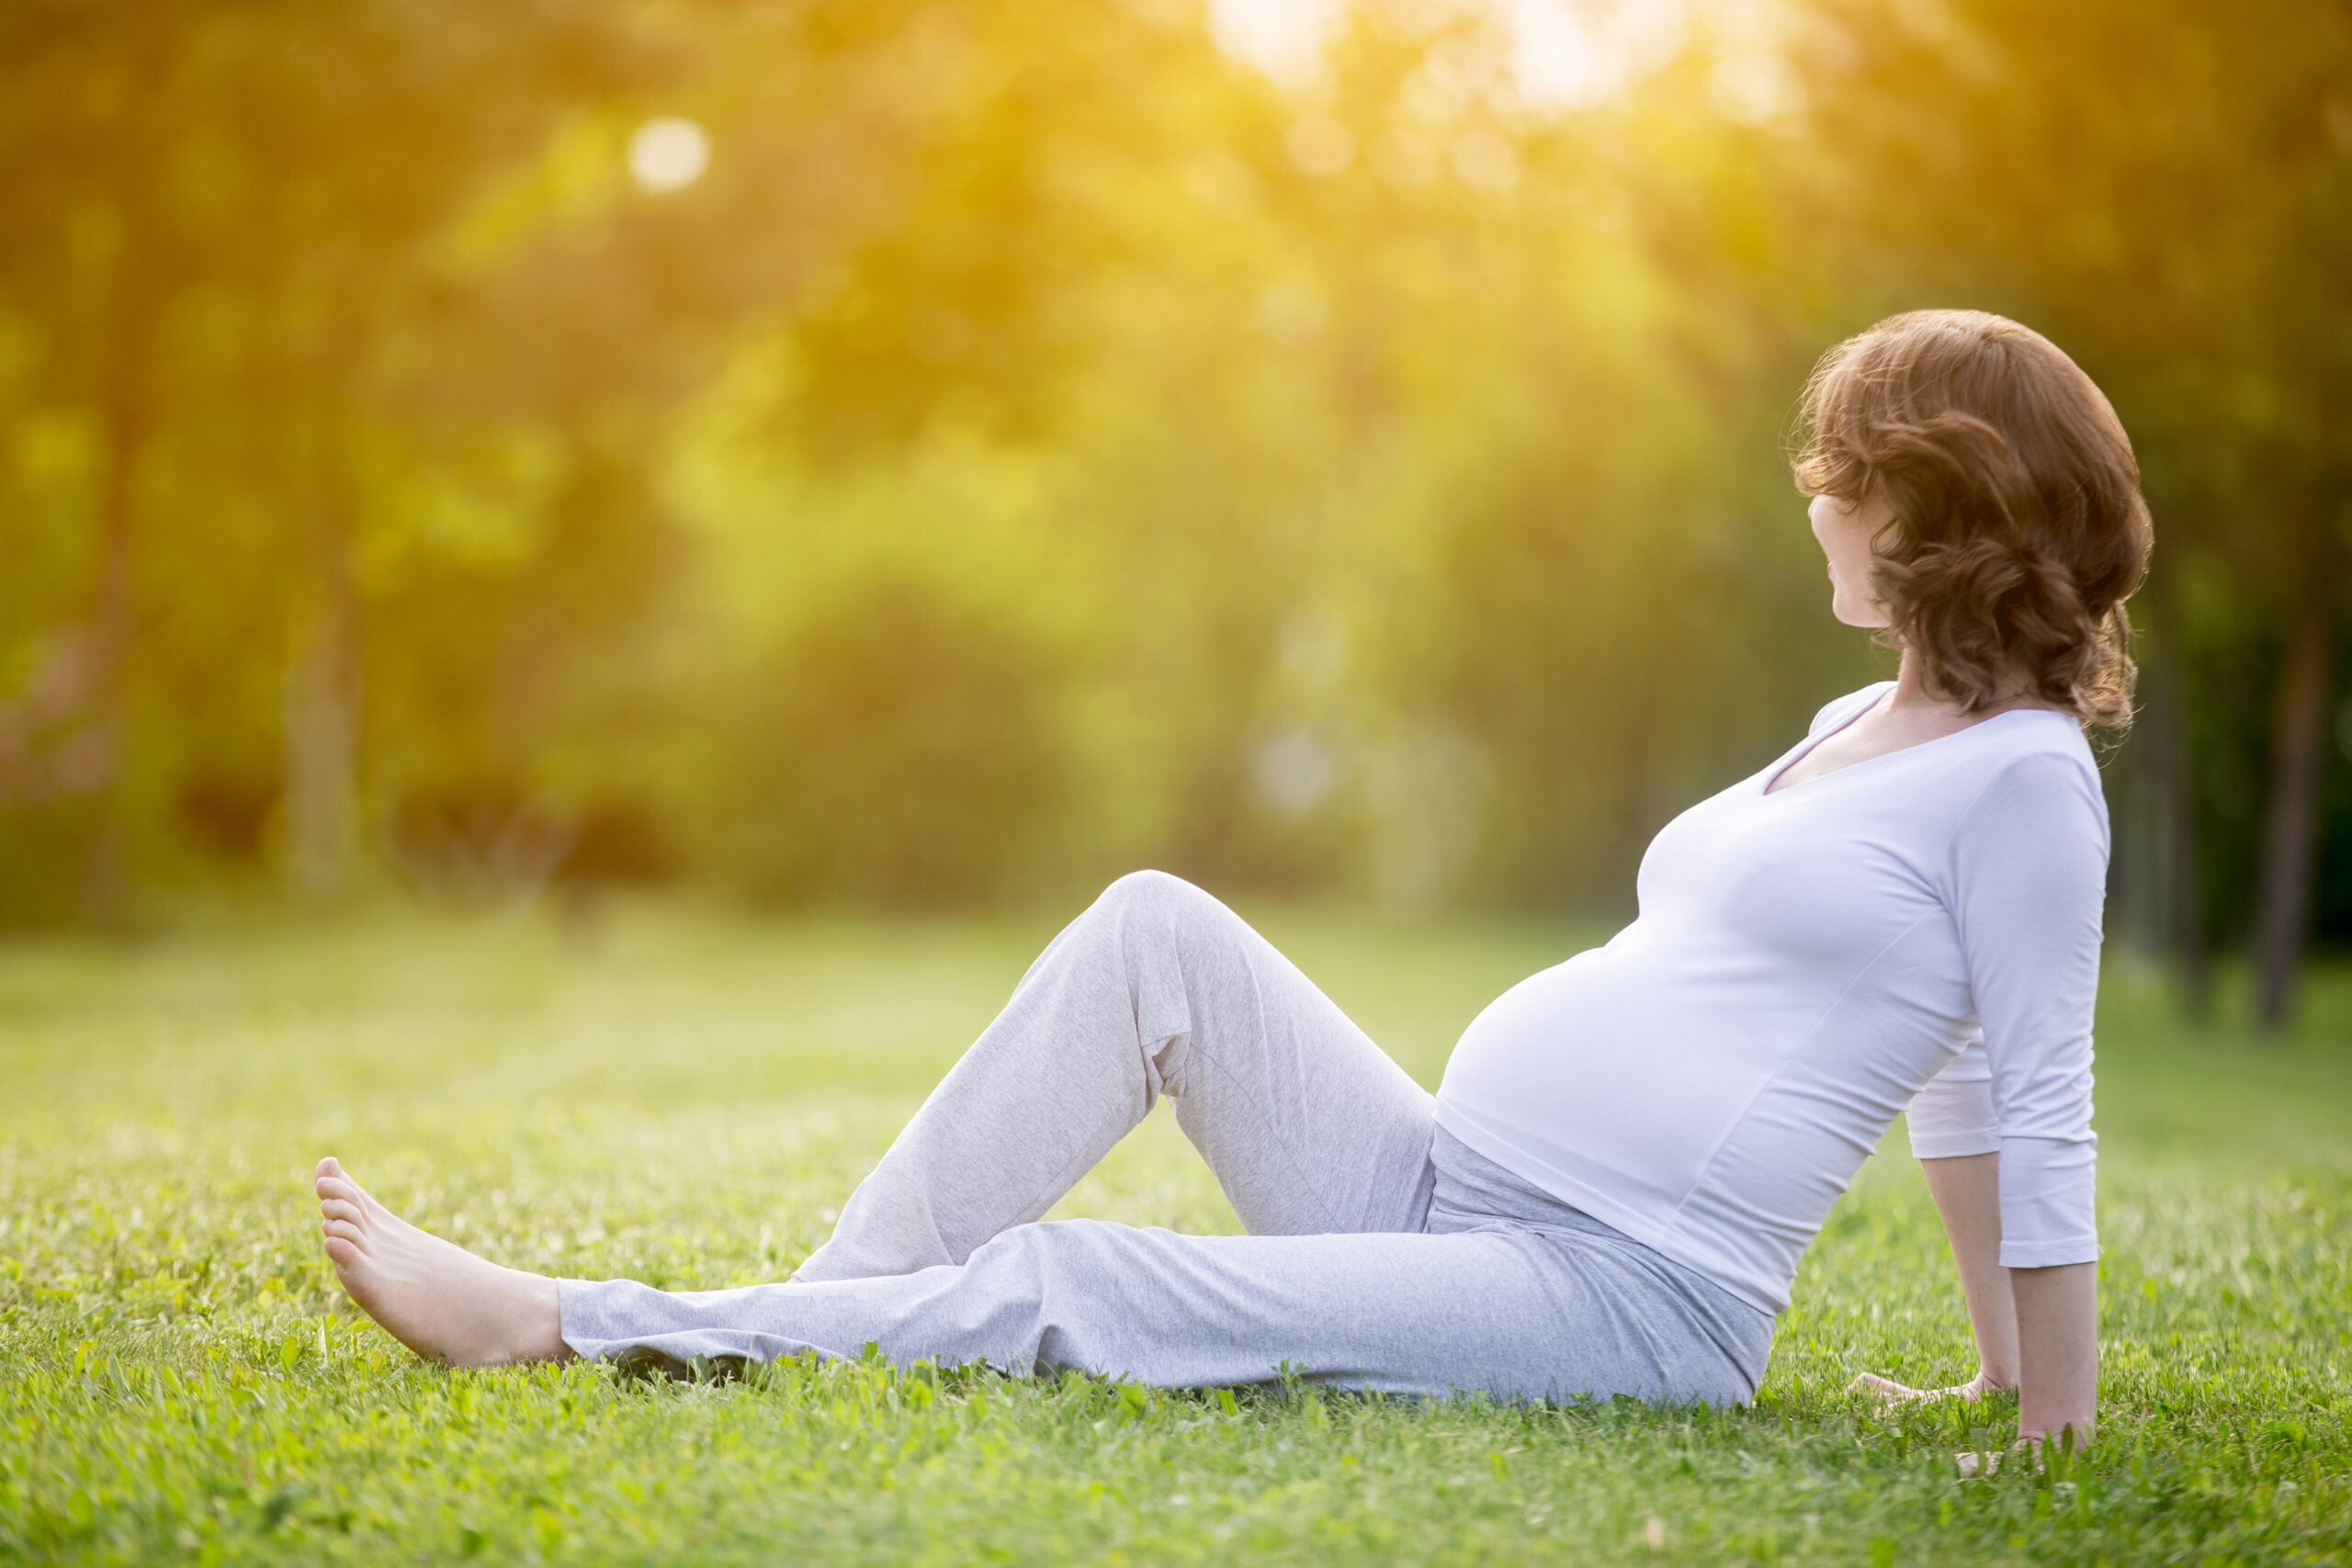 Happy pregnant woman on late pregnancy stage sitting on grass la